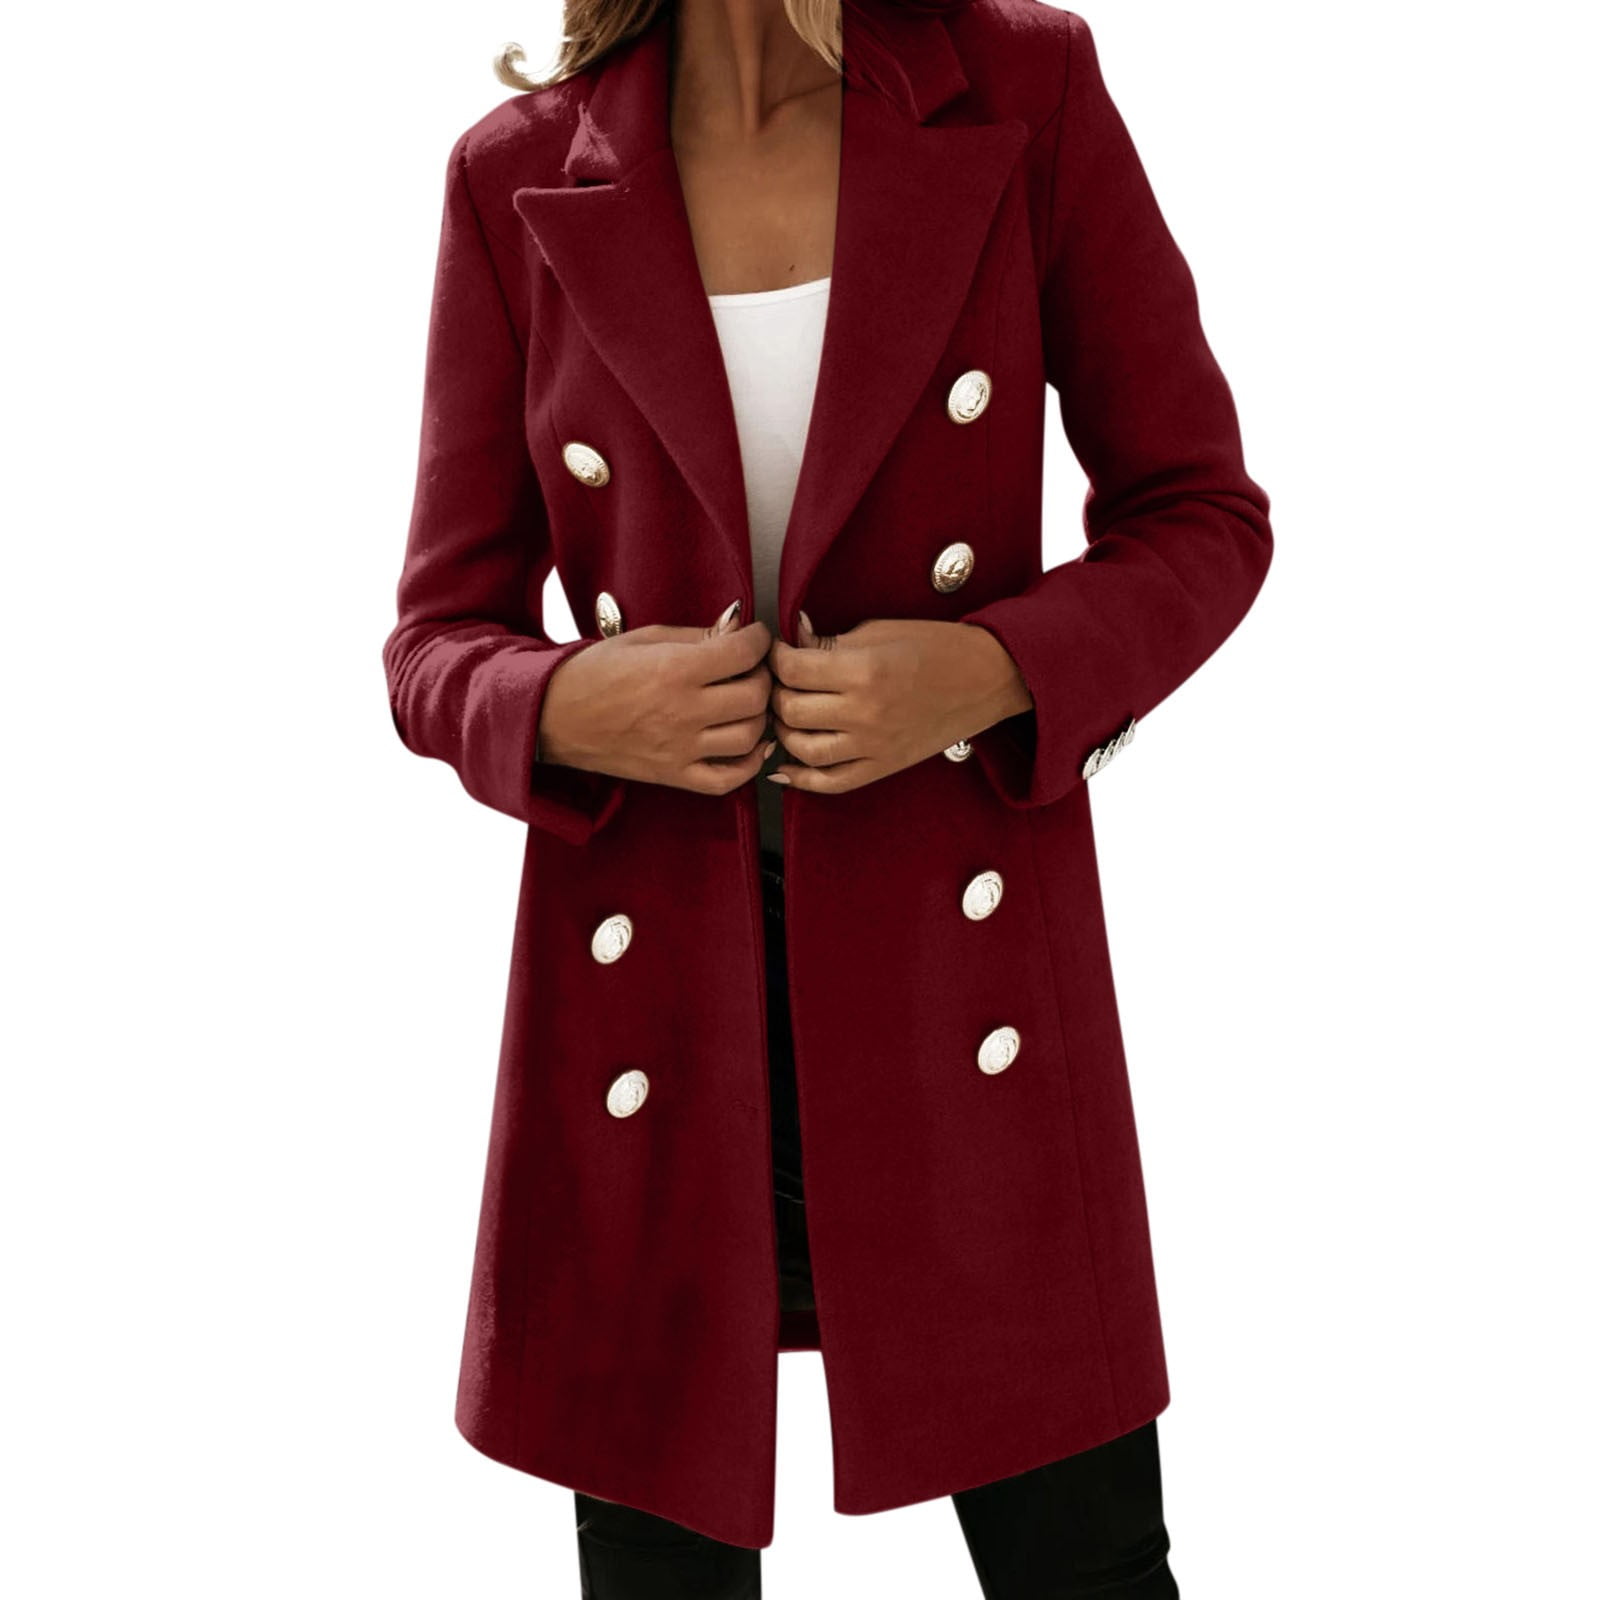 Mnjin Womens Winter Coat Trench Coat Double Breasted Notch Lapel Slim ...